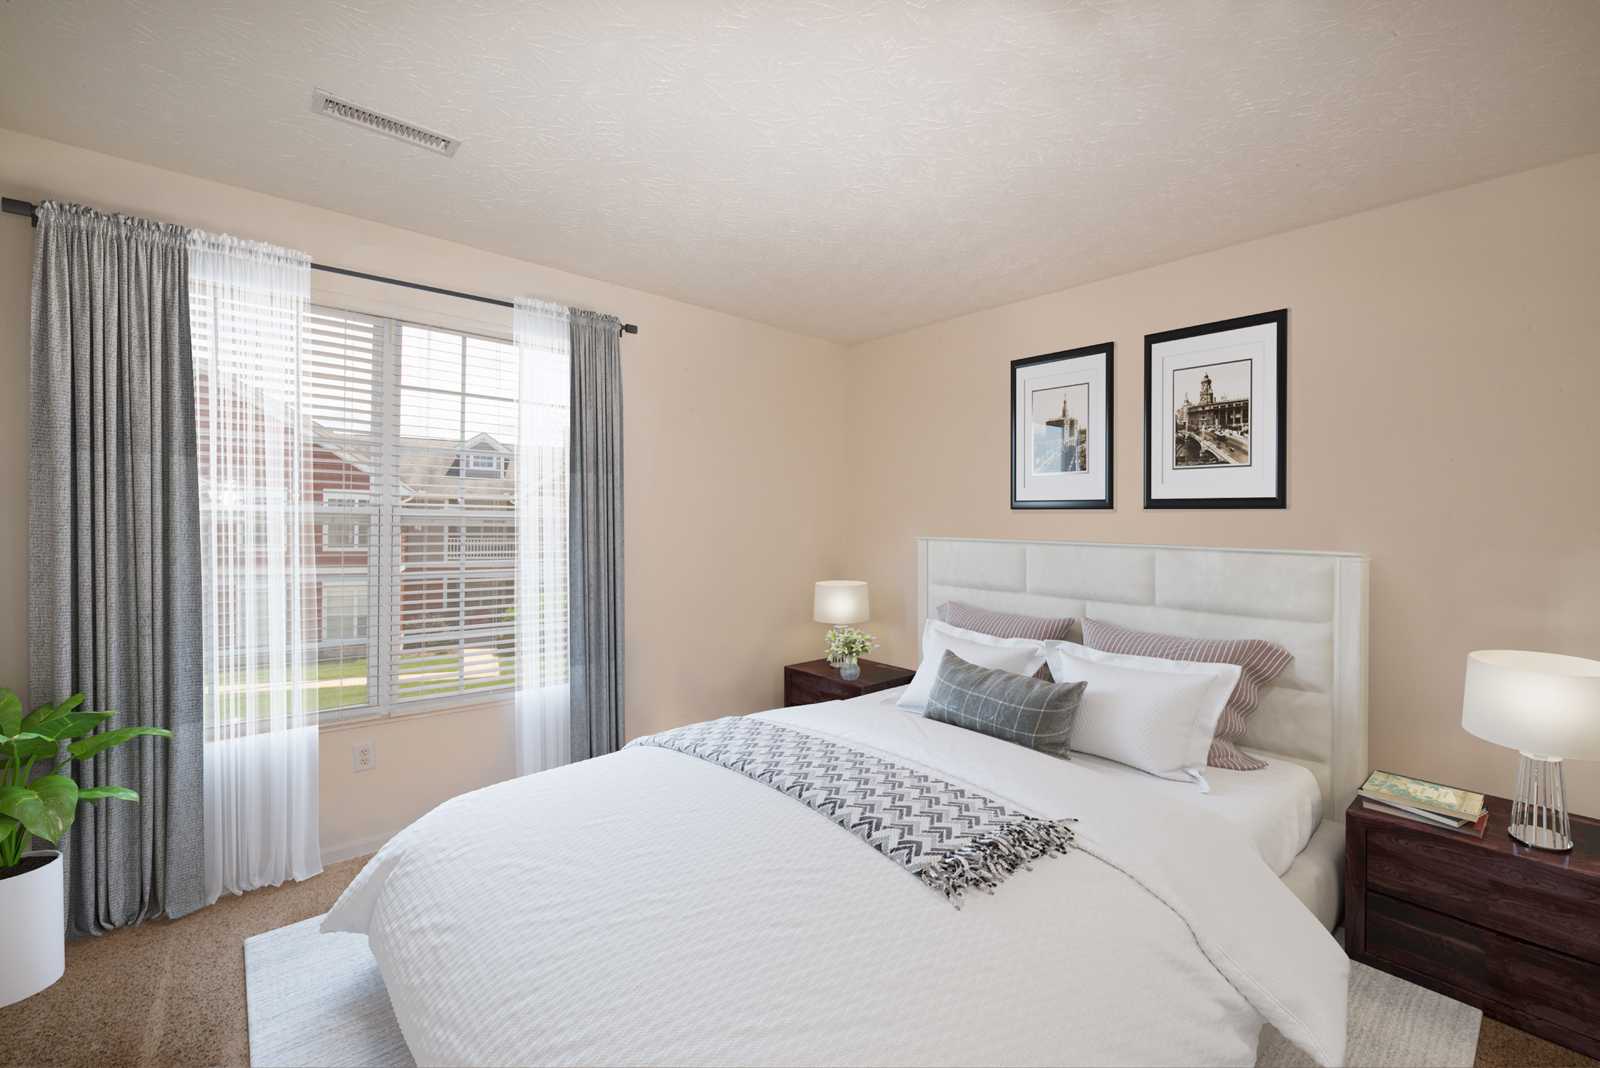 Cozy Bedroom at The Falls at Settlers Walk Apartments